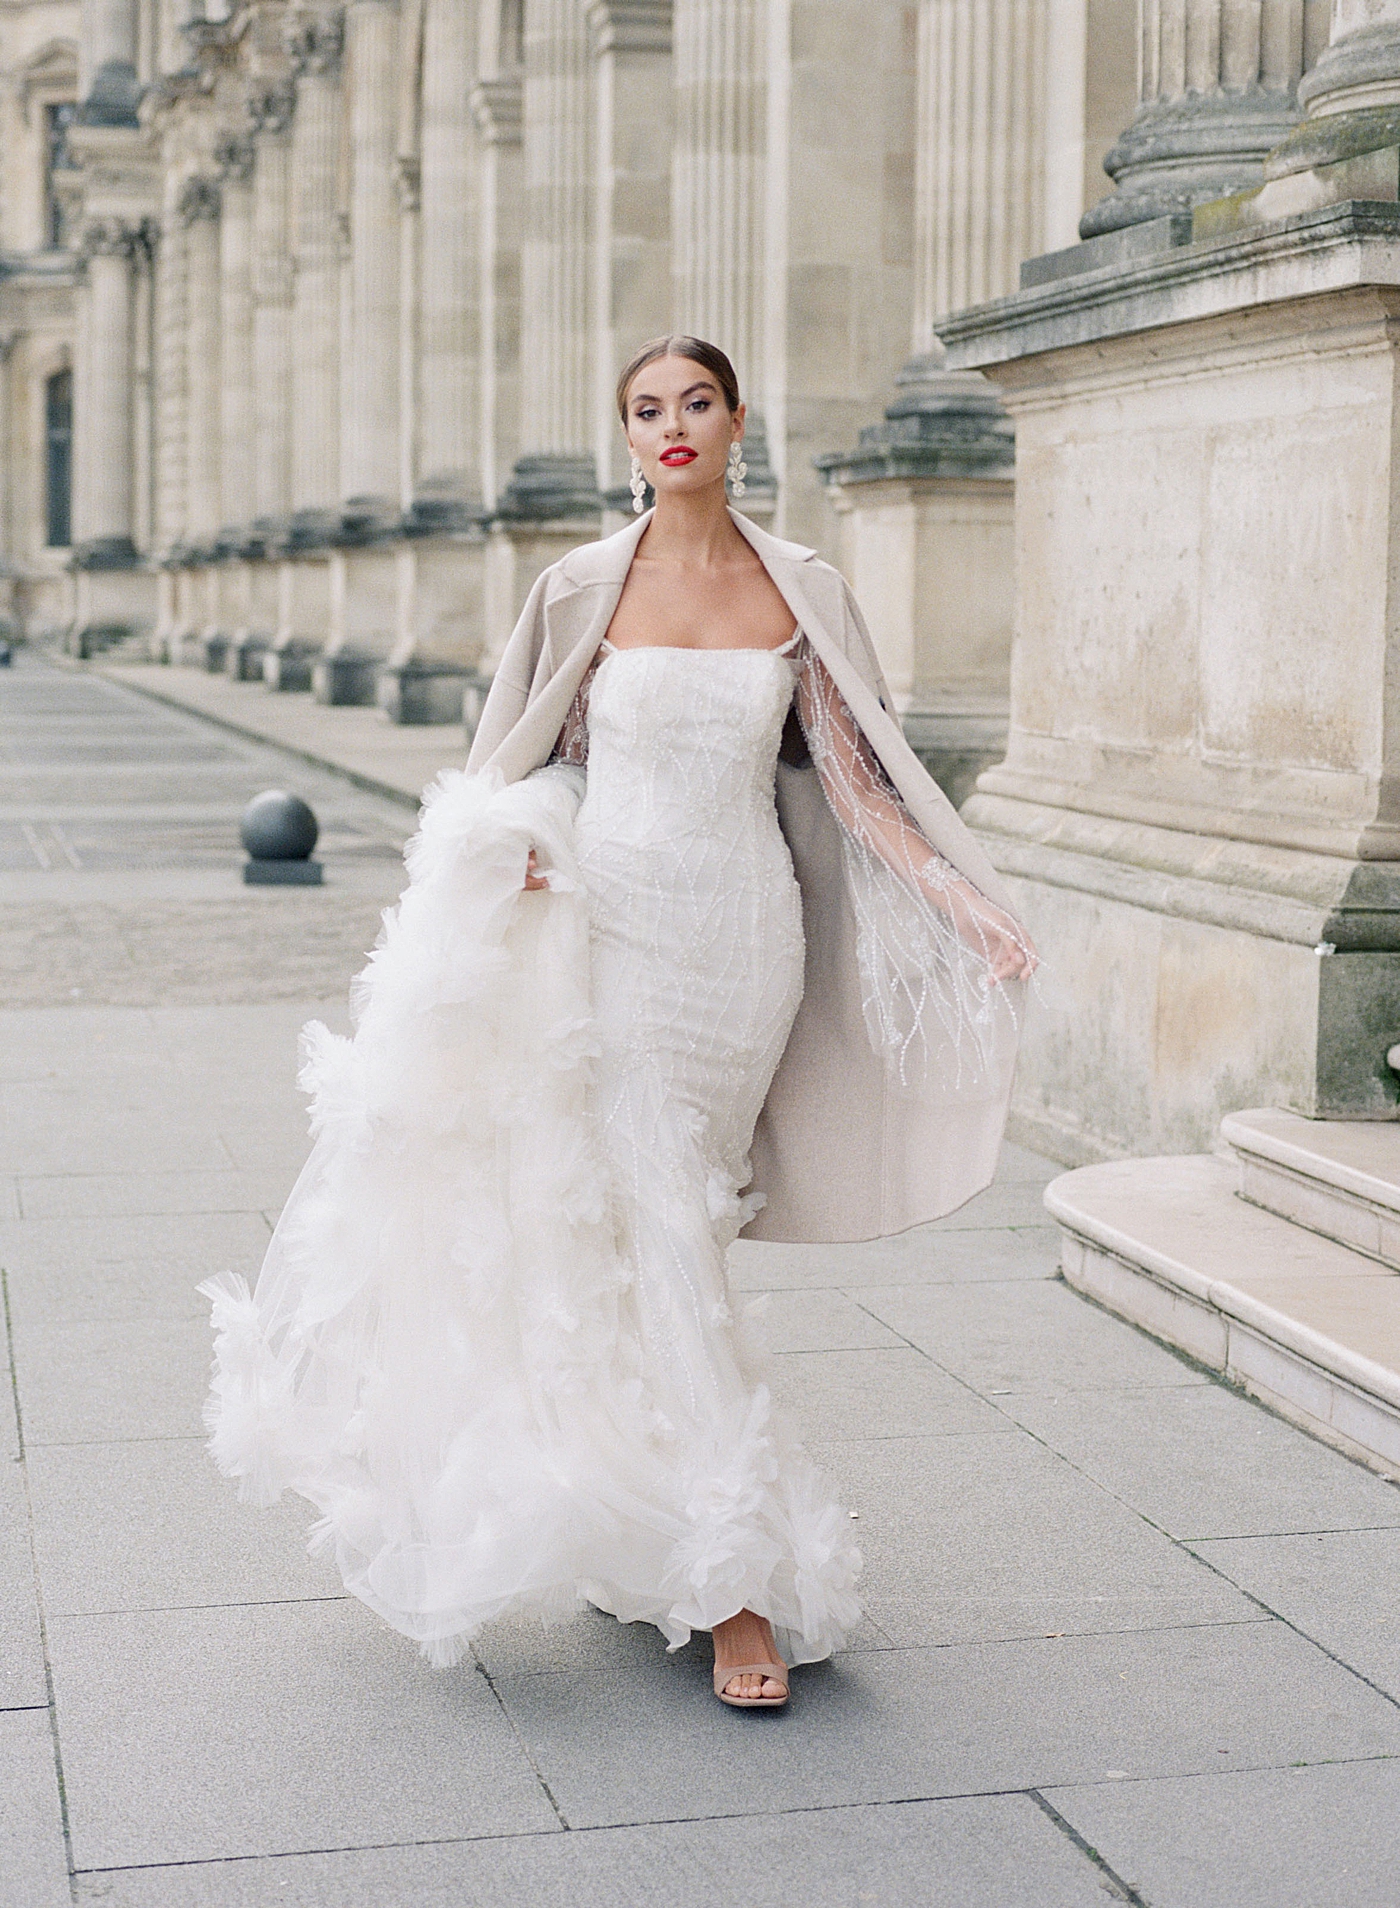 Bride walking towards the camera in a wedding dress with a train, beige coat, and bright red lipstick during Paris Elopement | Image by Hope Helmuth Photography